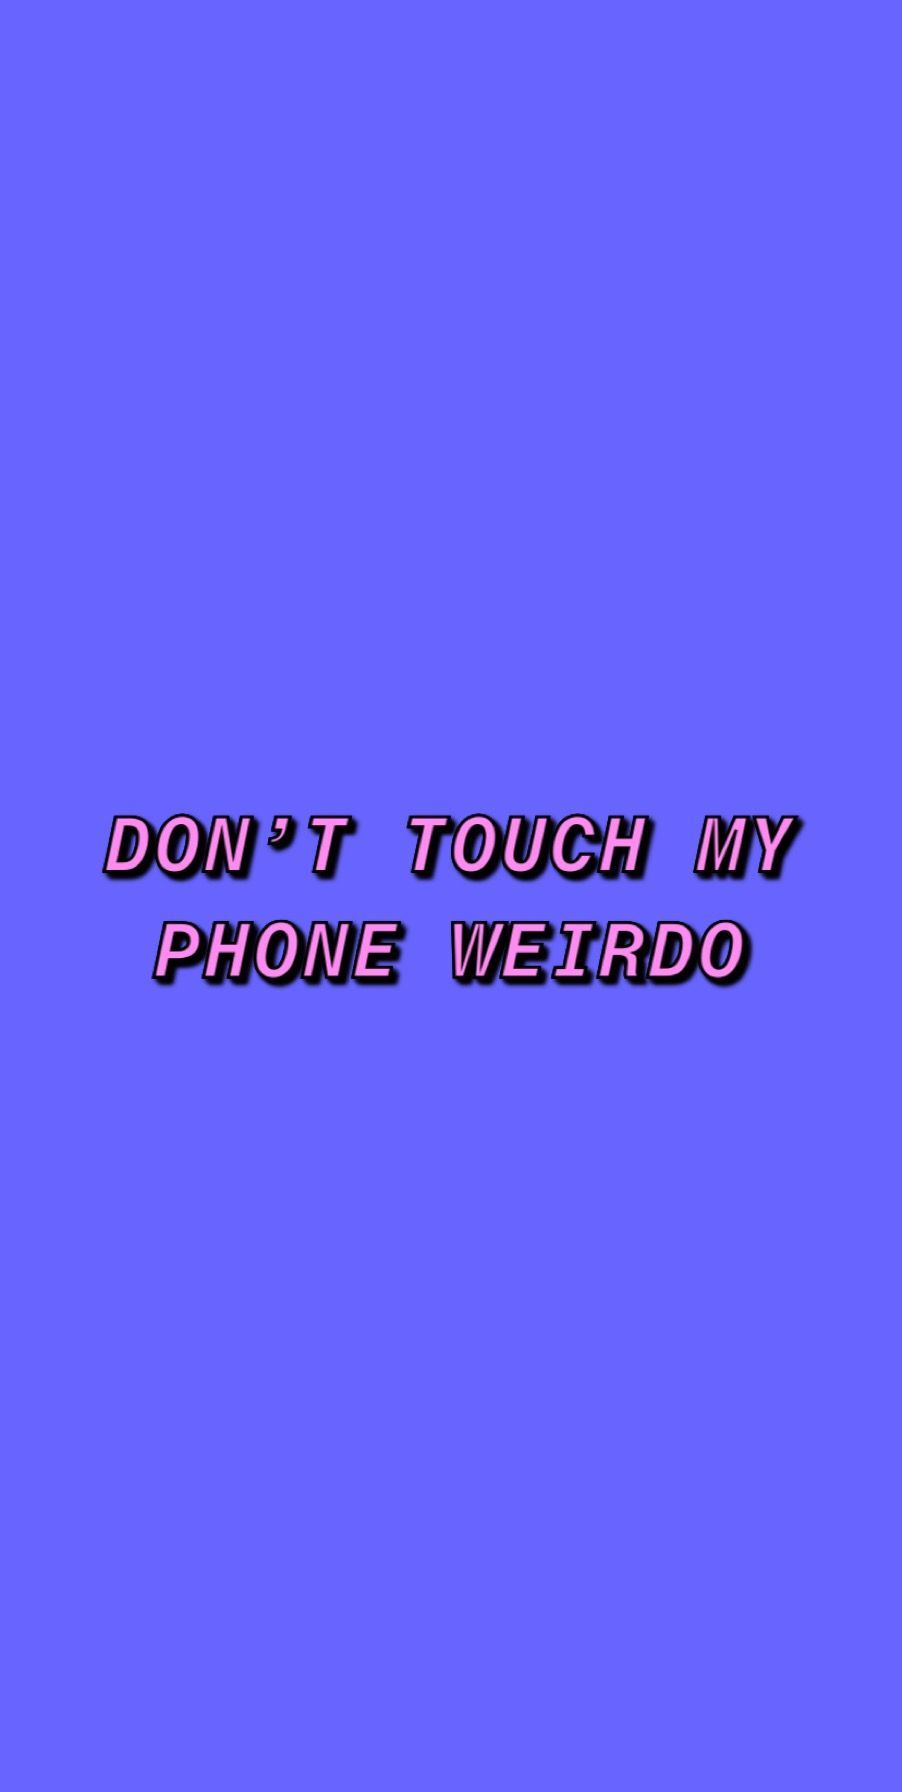 DONT TOUCH MY PHONE Purple Wallpaper. Dont touch my phone wallpaper, Purple wallpaper, iPhone wallpaper vintage